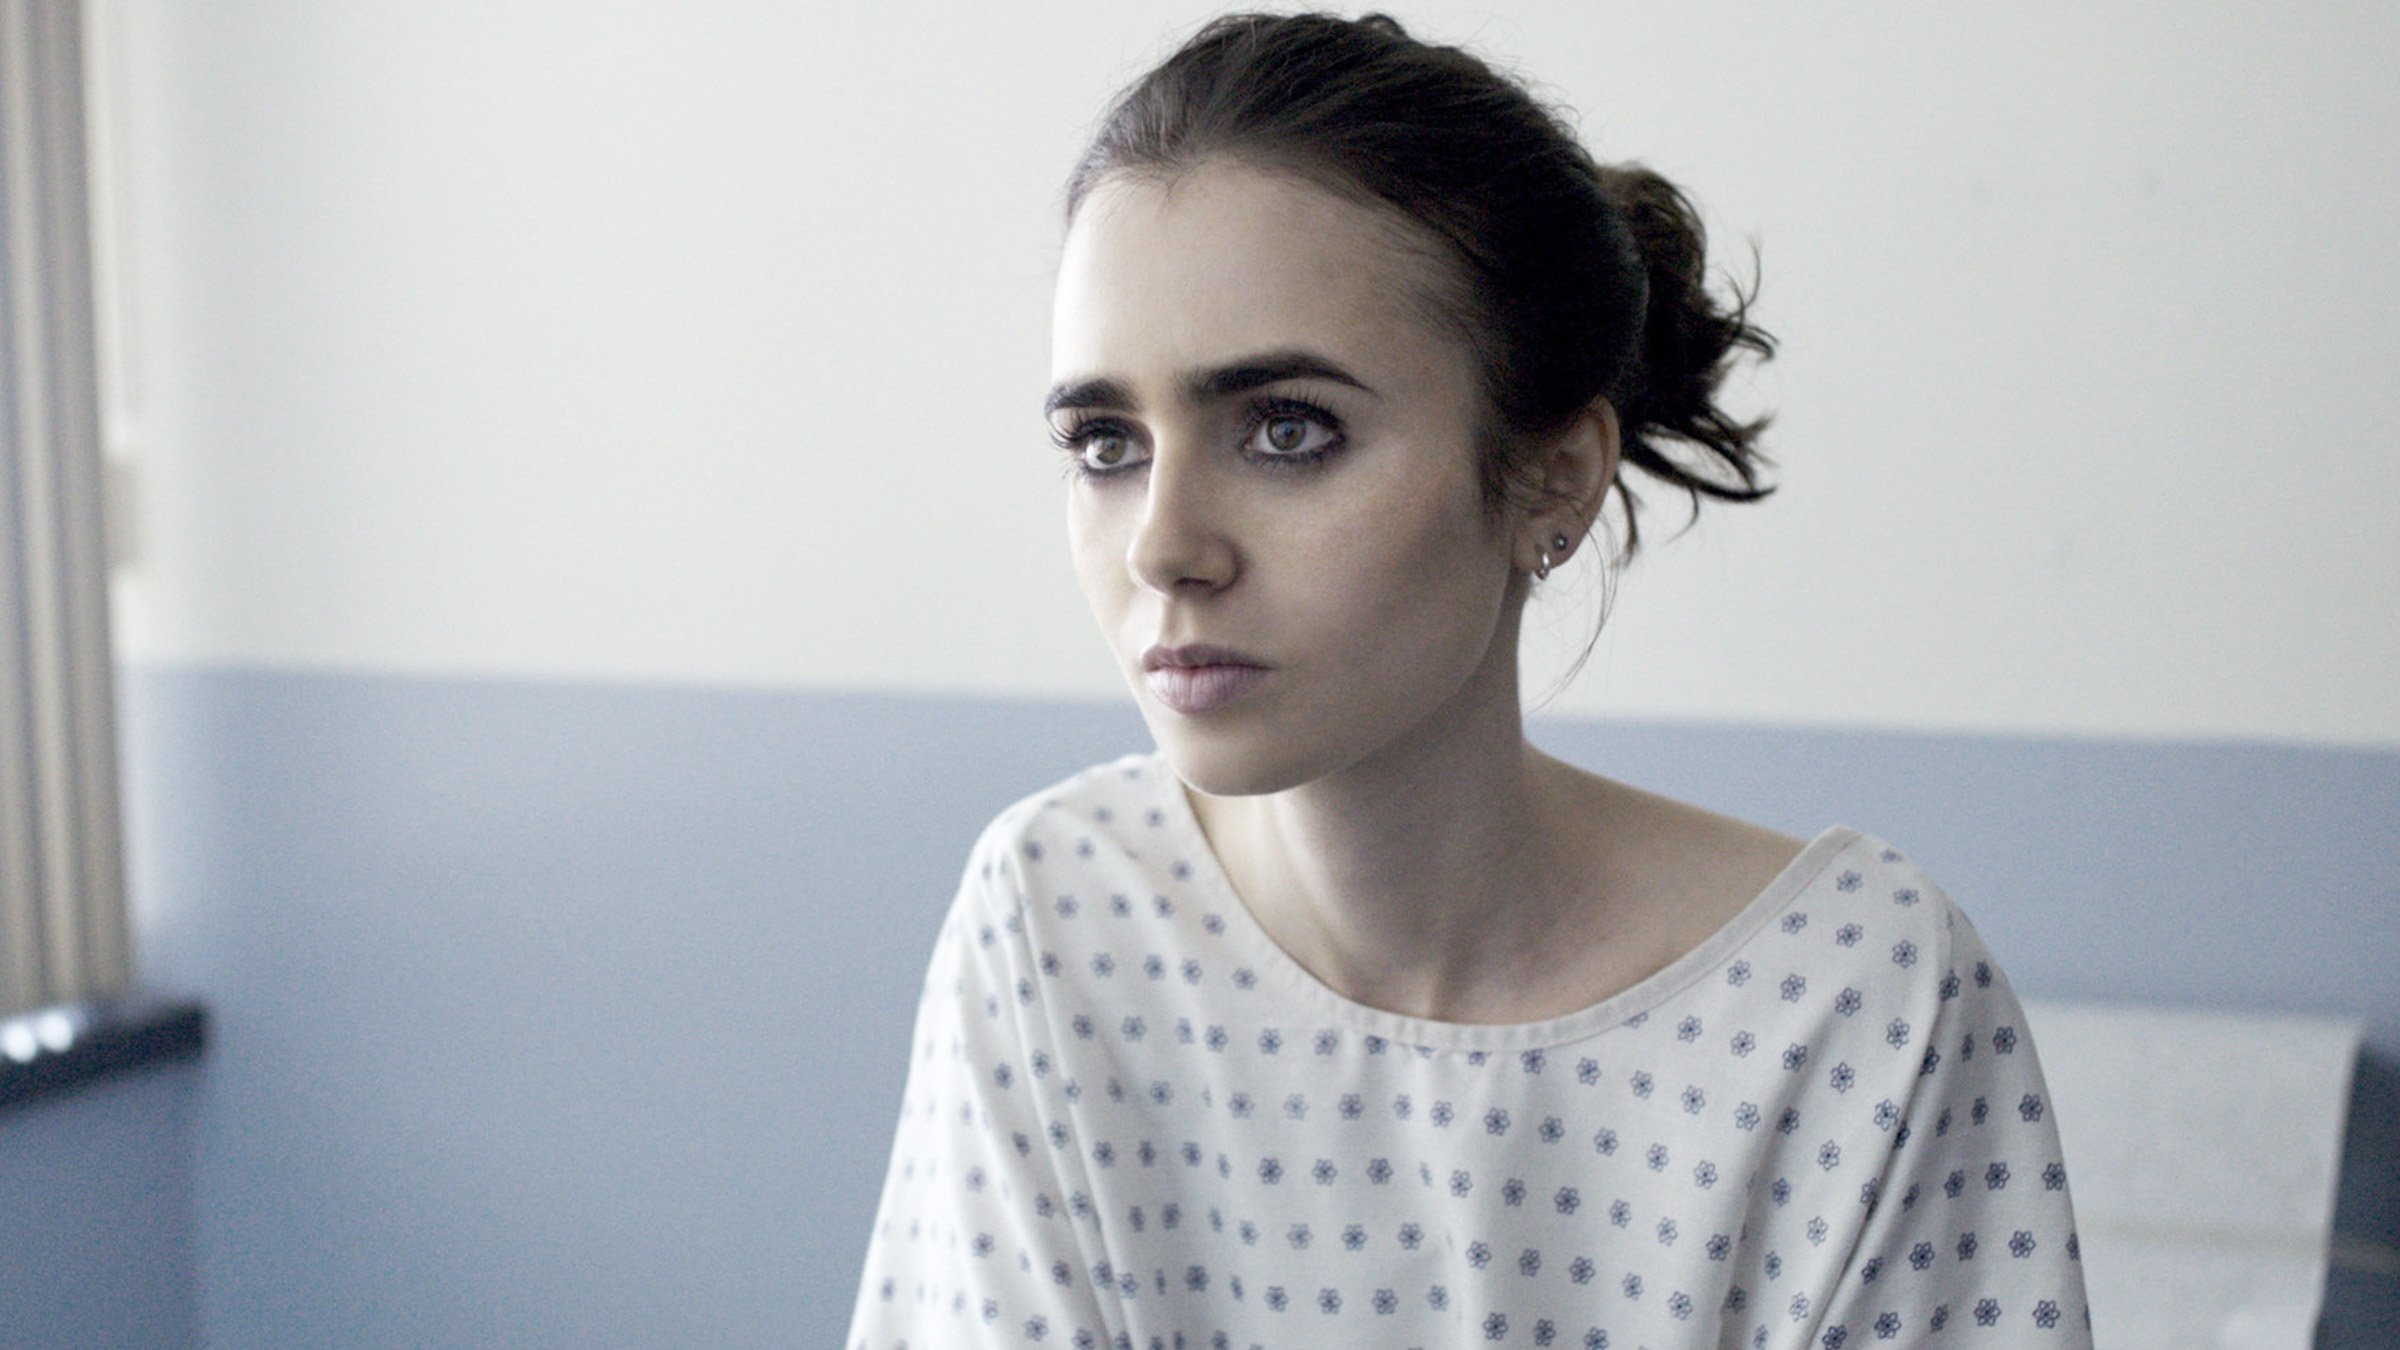 To the Bone confirms there are (almost) no good movies about anorexia, To  the Bone